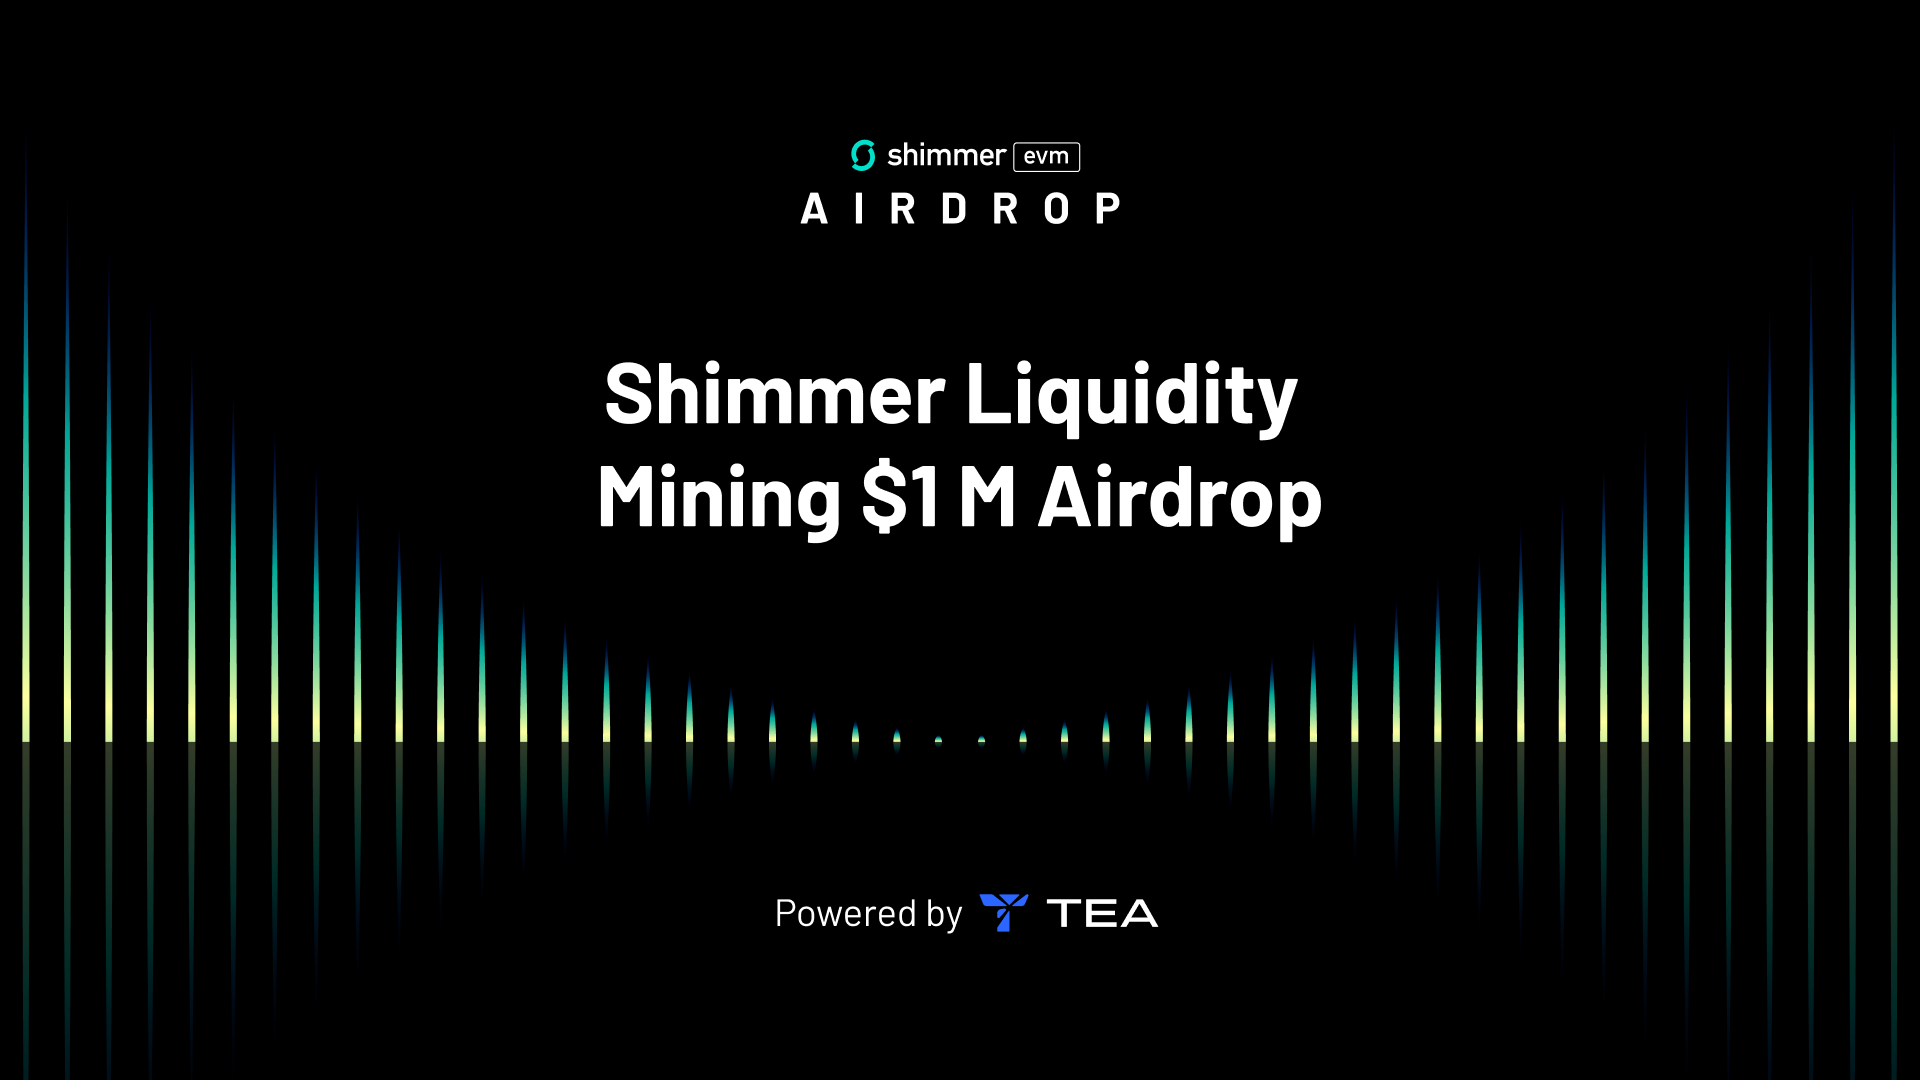 Announcing the Shimmer Liquidity Mining $1 M Airdrop